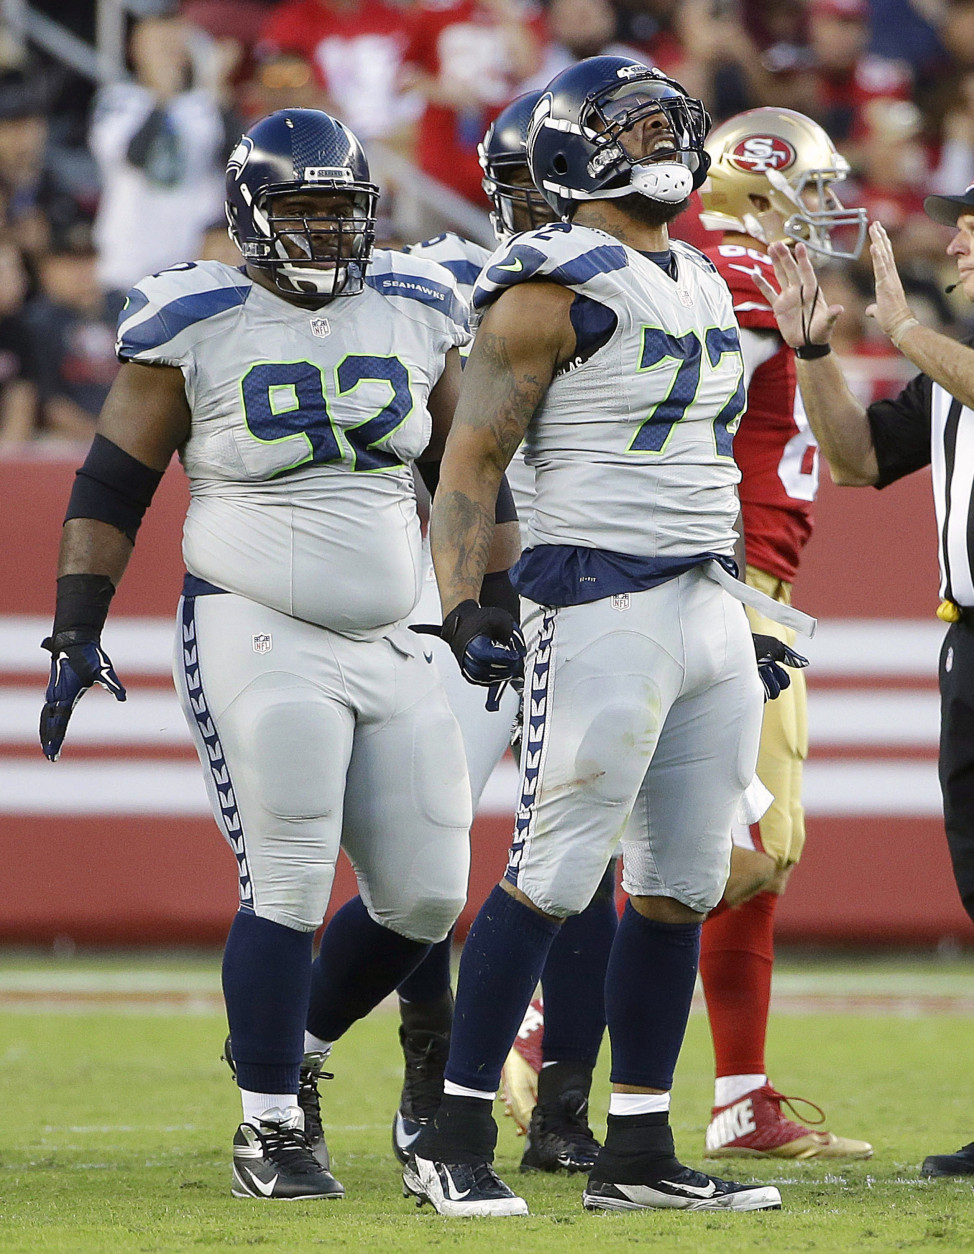 Seattle Seahawks defensive end Michael Bennett (72) reacts after sacking San Francisco 49ers quarterback Colin Kaepernick during the first half of an NFL football game in Santa Clara, Calif., Thursday, Oct. 22, 2015. Seahawks defensive tackle Brandon Mebane (92) looks on. (AP Photo/Marcio Jose Sanchez)